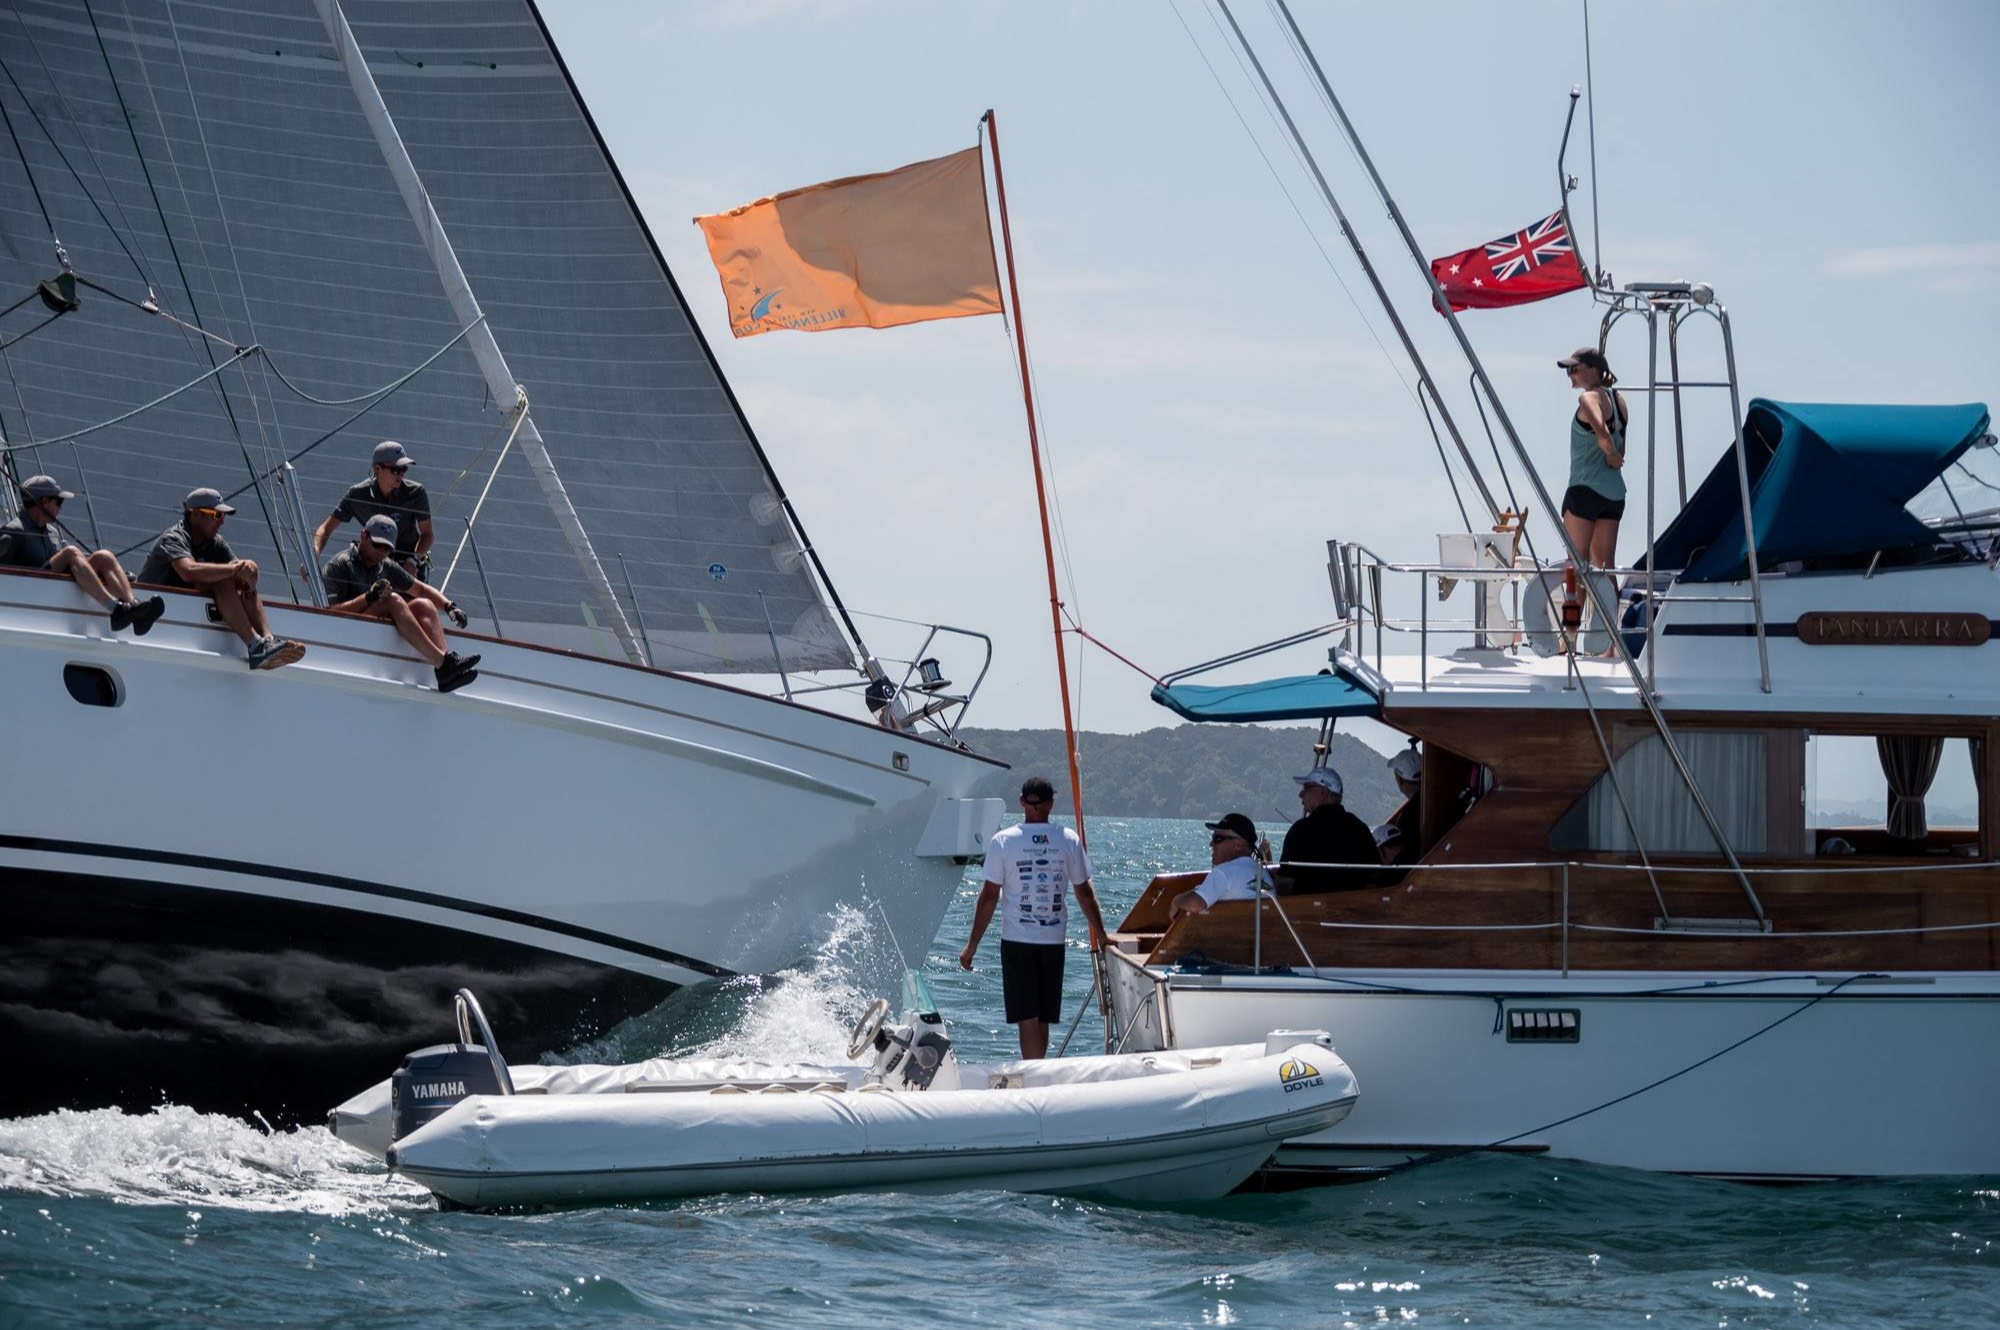 From a motor yacht you can comfortably watch the competitions. If you are lucky, you will not even have to sit in the tender to catch up with the competitors and look at them closer. Here, Tawera seems to have come to visit»herself«.